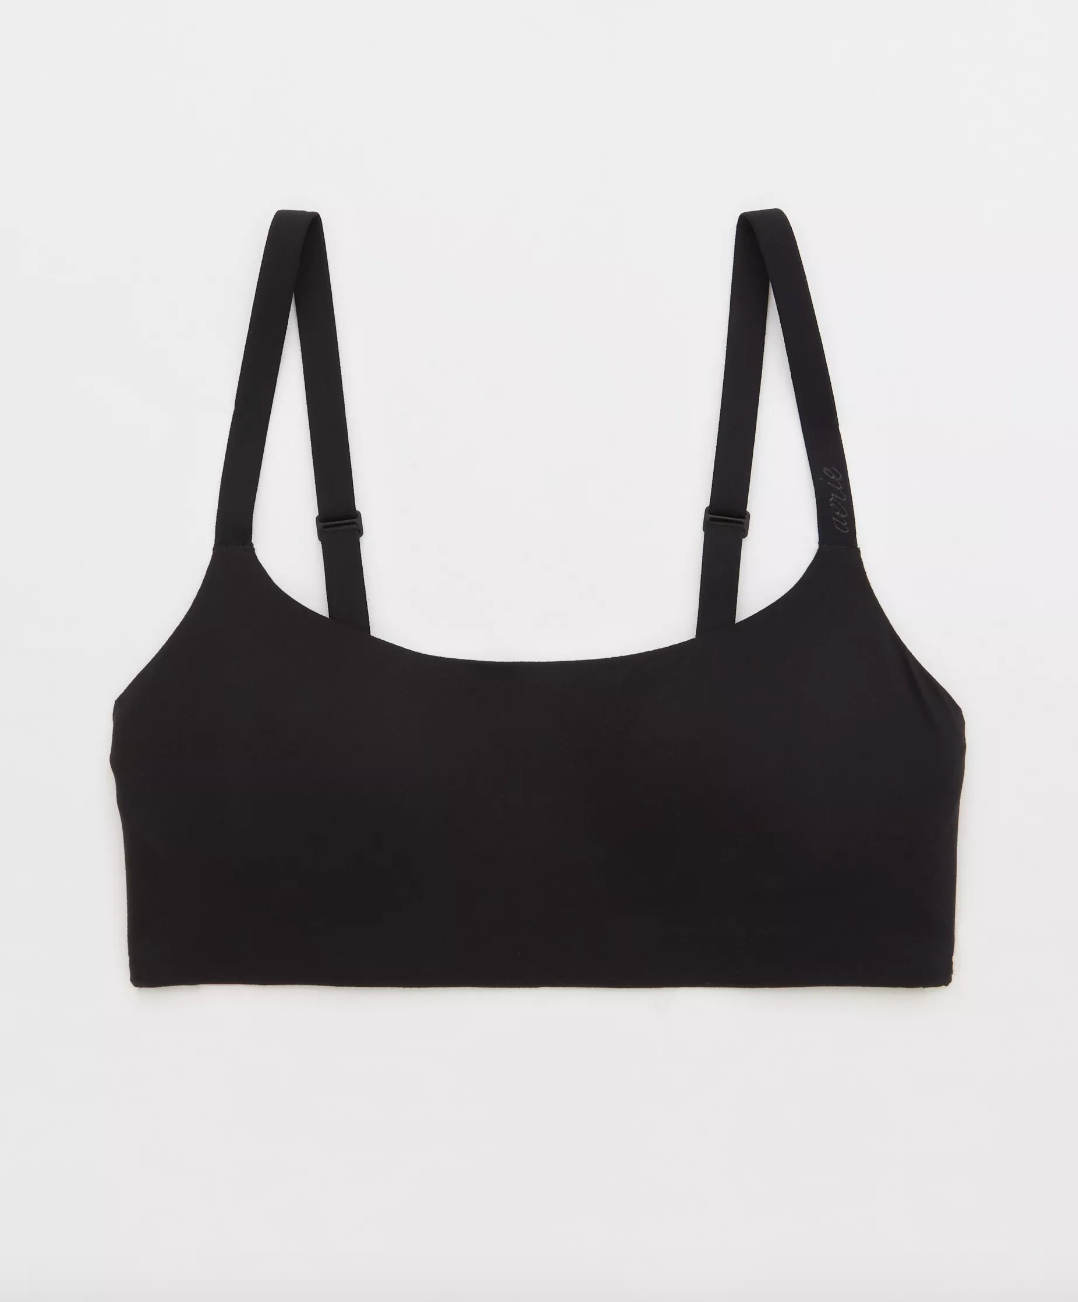 Wired vs wireless: Which bra suits you best today? – Tommy John